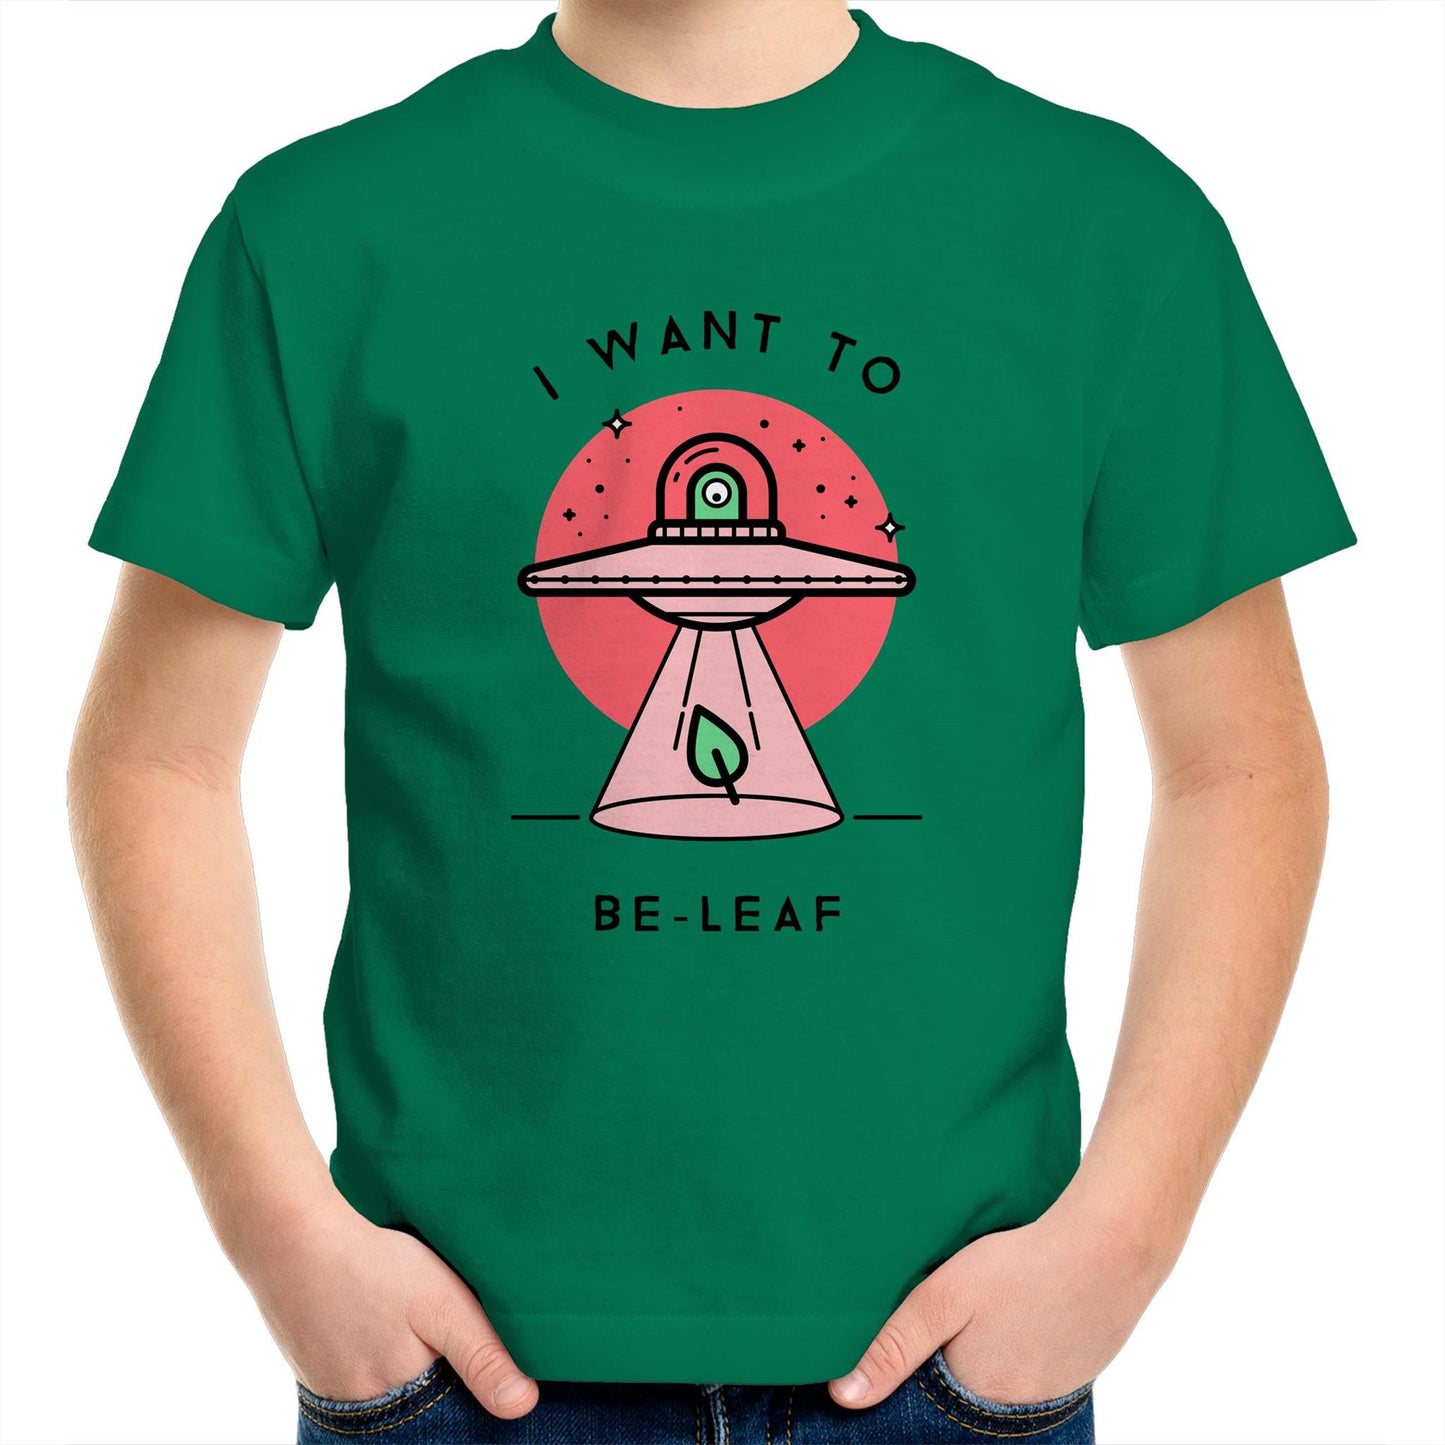 I Want To Be-Leaf, UFO - Kids Youth T-Shirt Kelly Green Kids Youth T-shirt Sci Fi